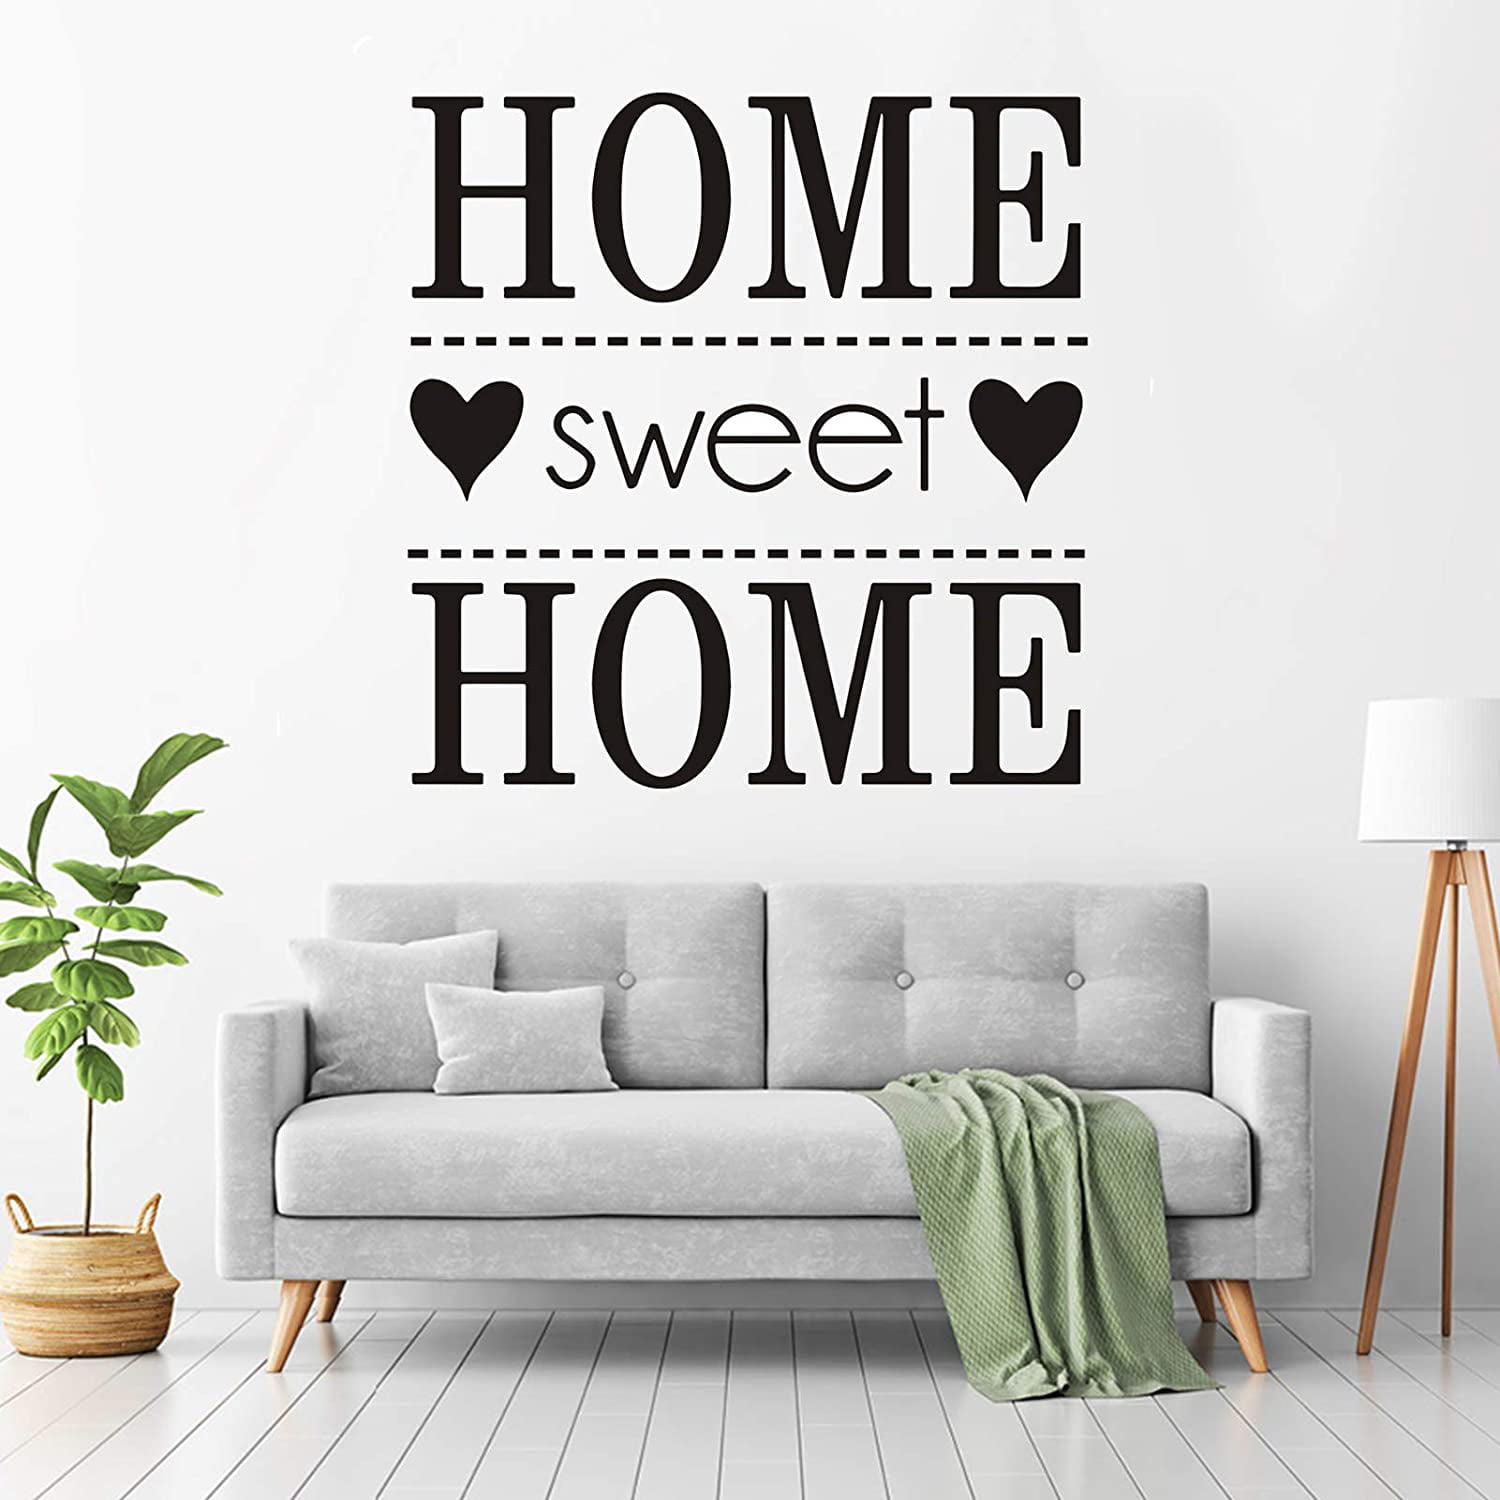 Highest Quality Wall Decal Sticker Home Sweet Home 